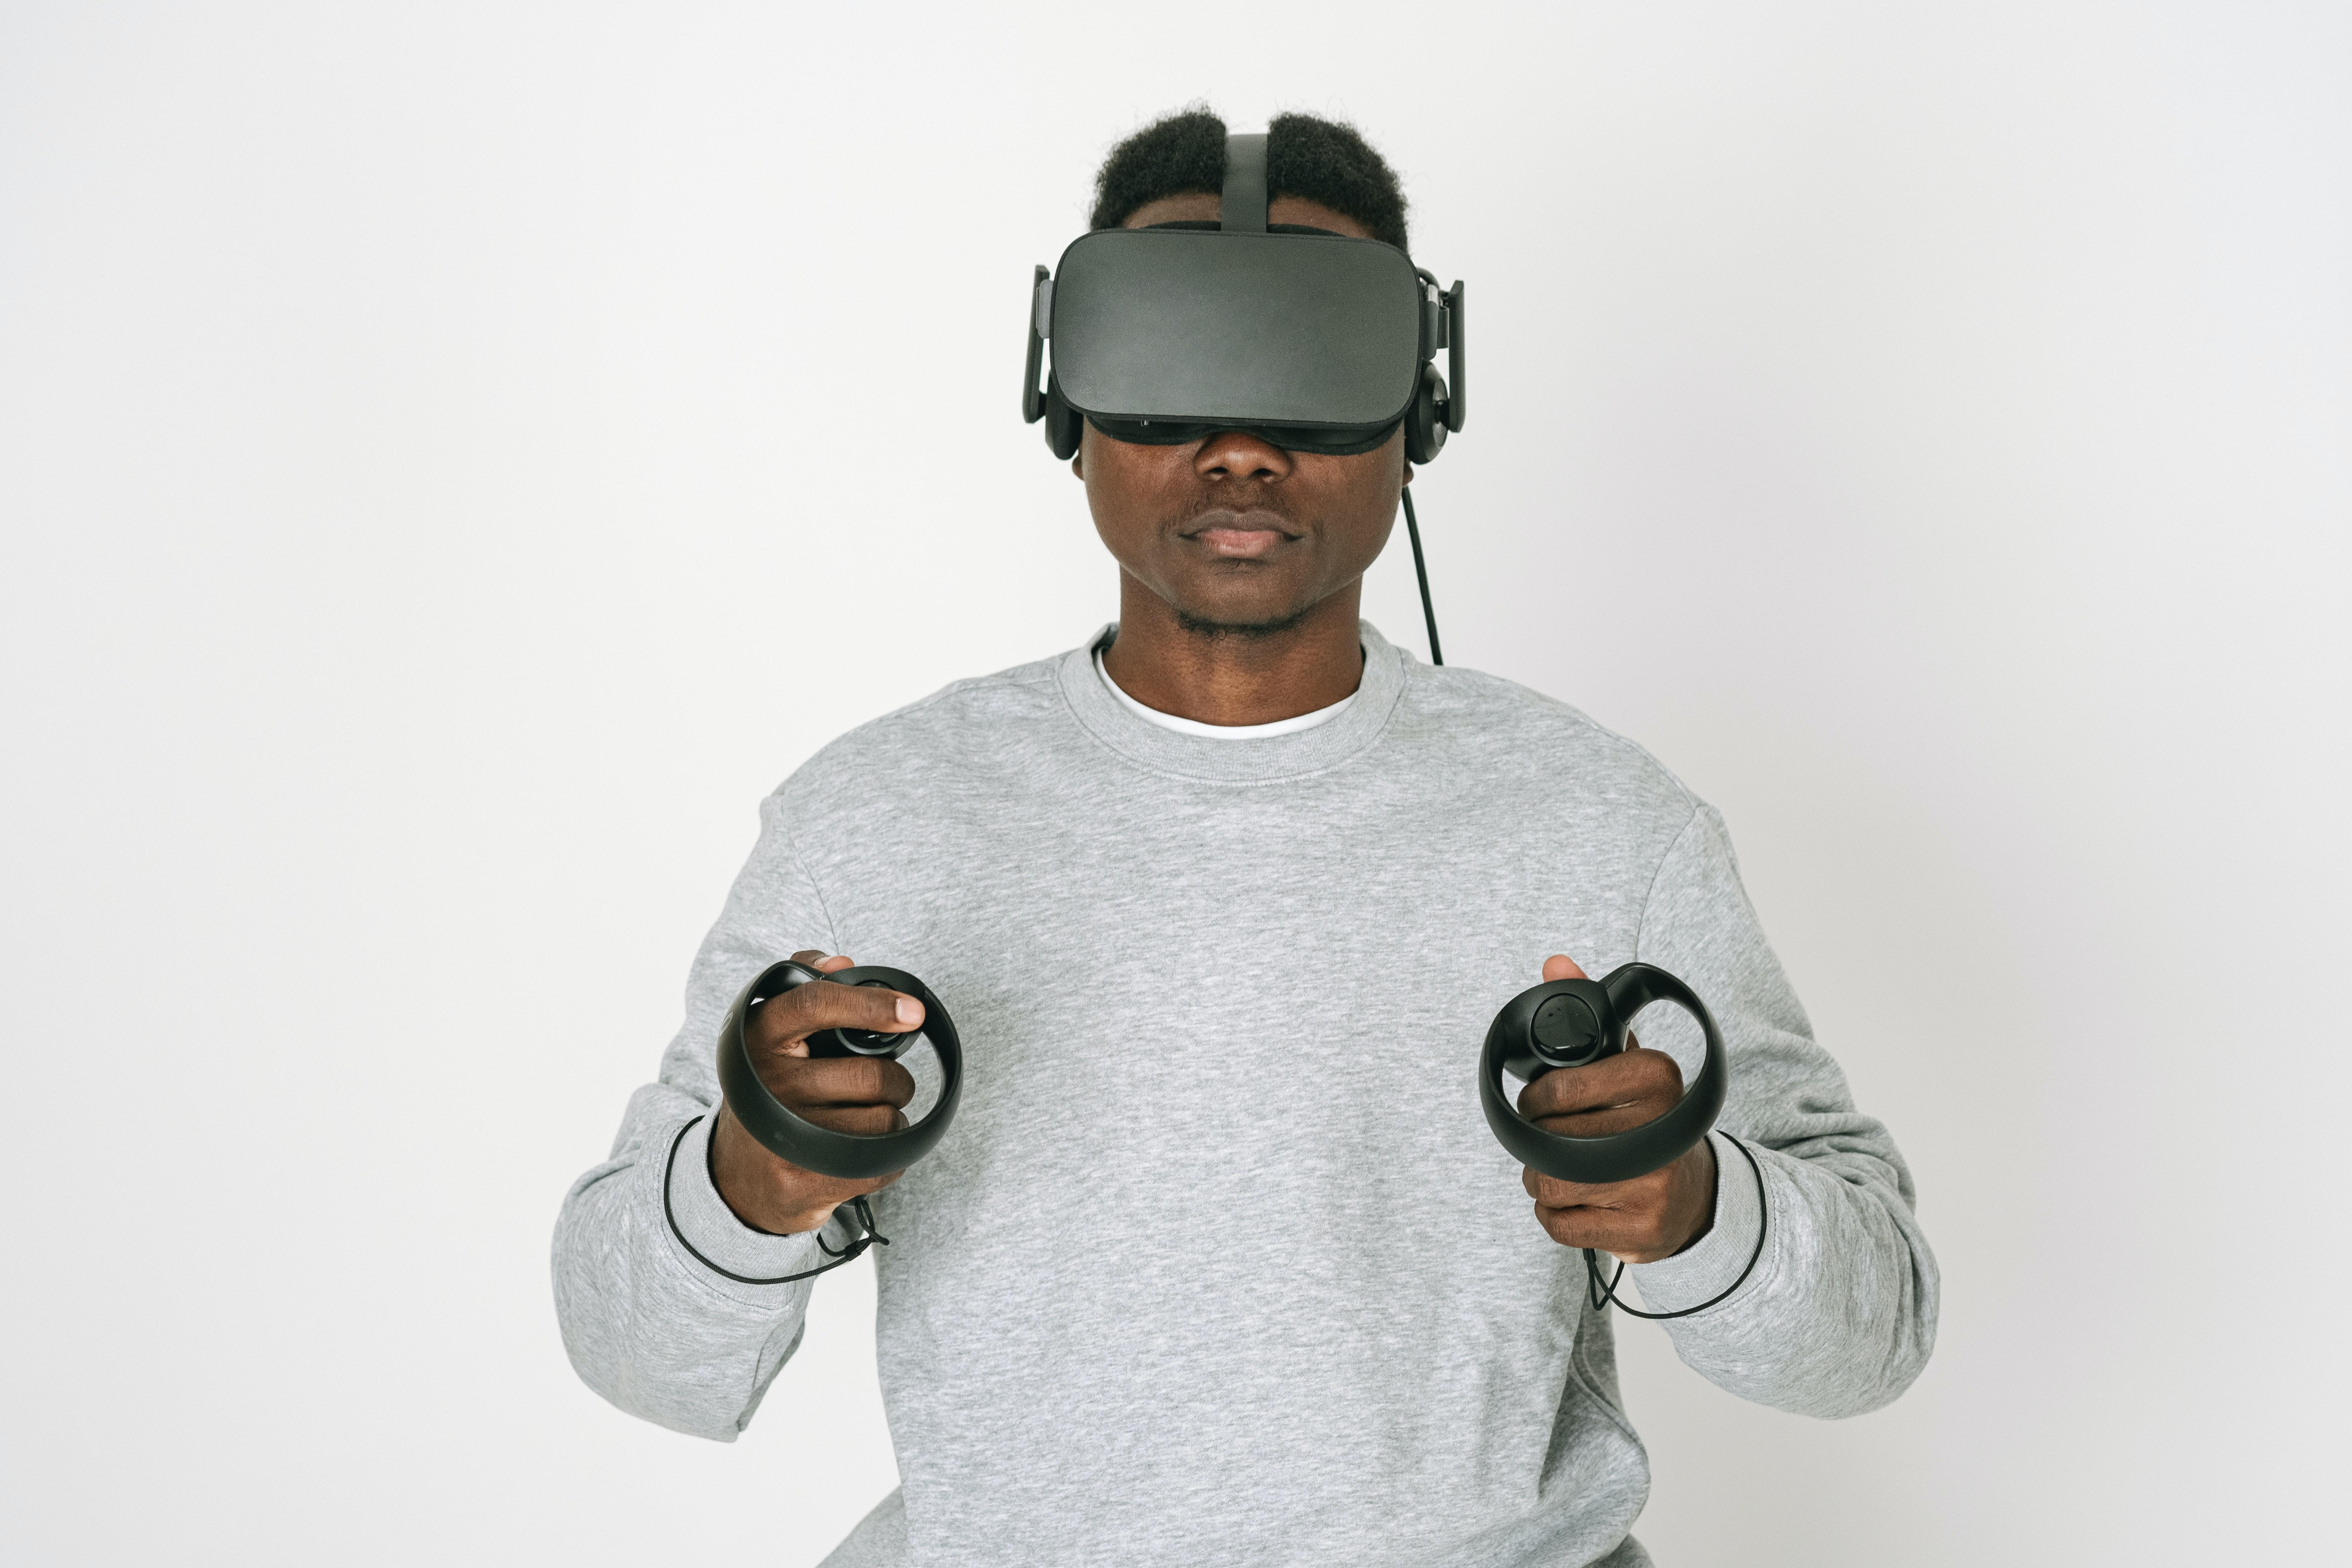  How To Use Headphones With Oculus Rift S 